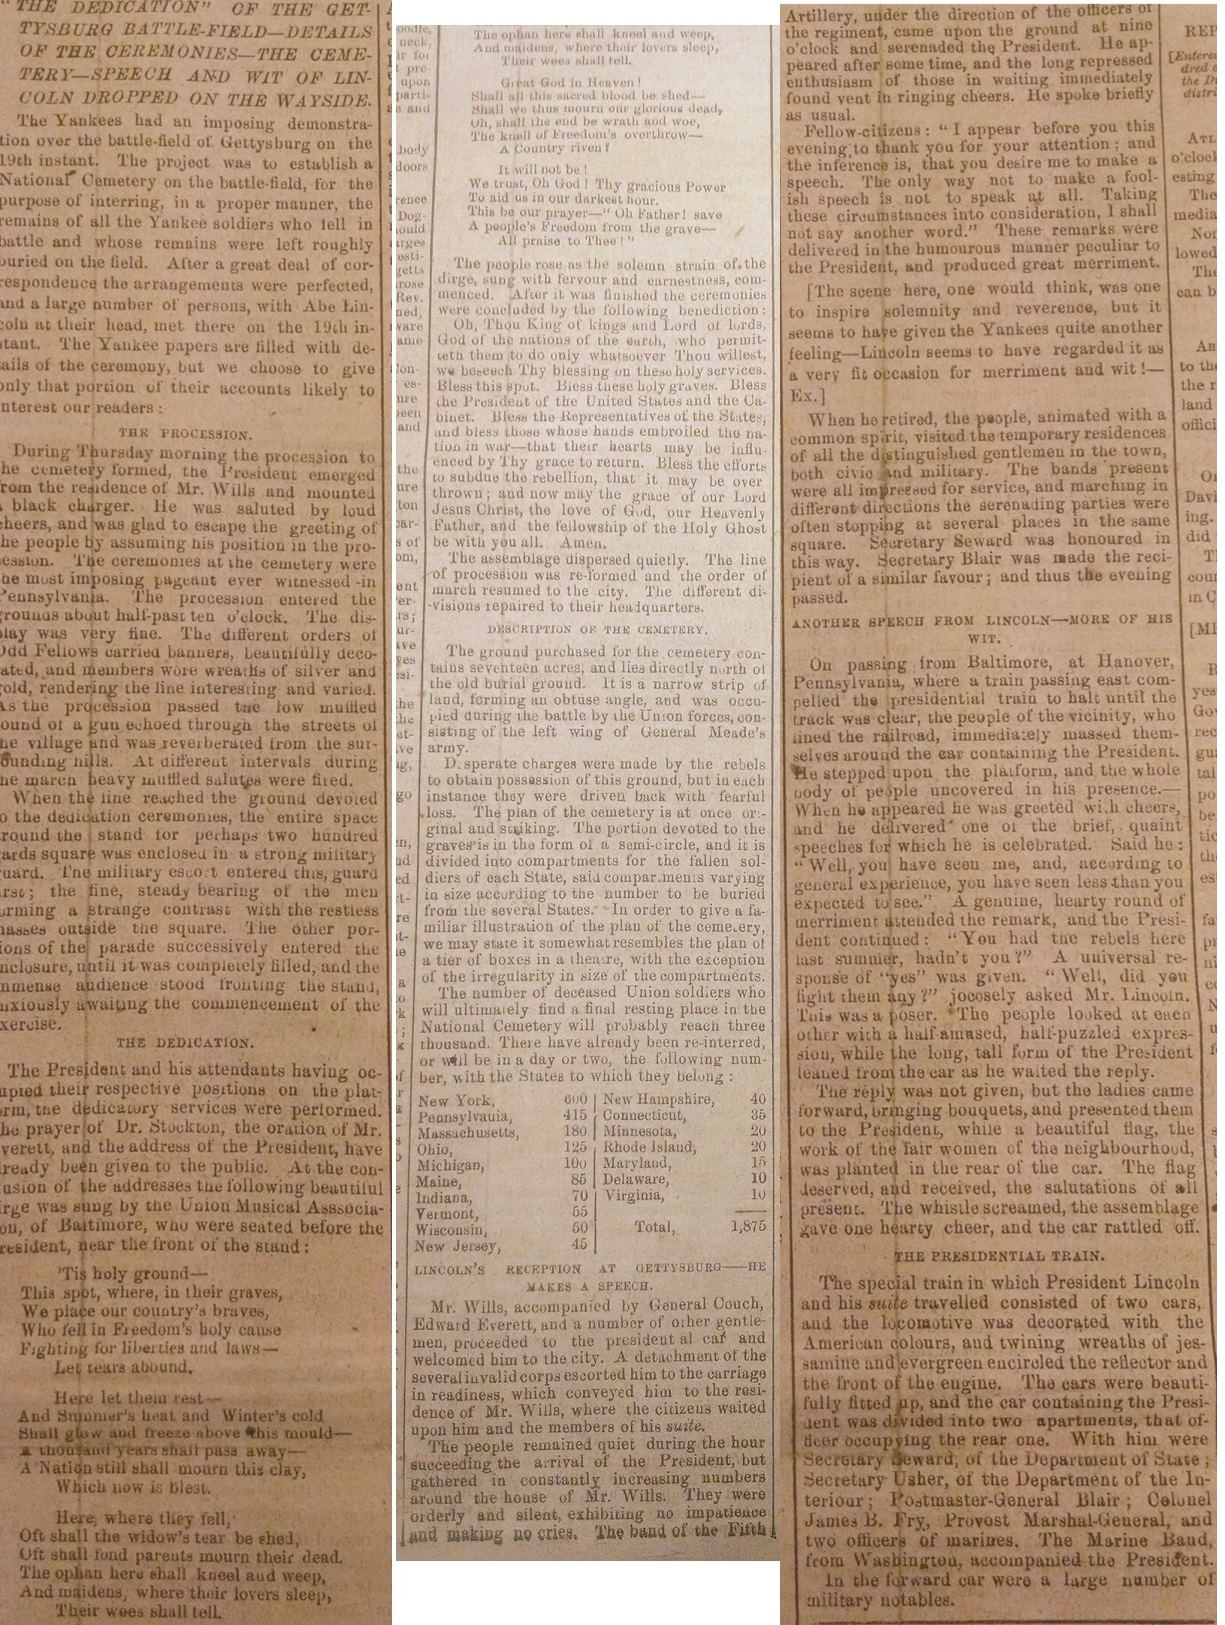 Richmond Newspapers to Lincoln: Address, What Address? An “Entirely Yankeeish” Affair. 150 Years Ago Today.